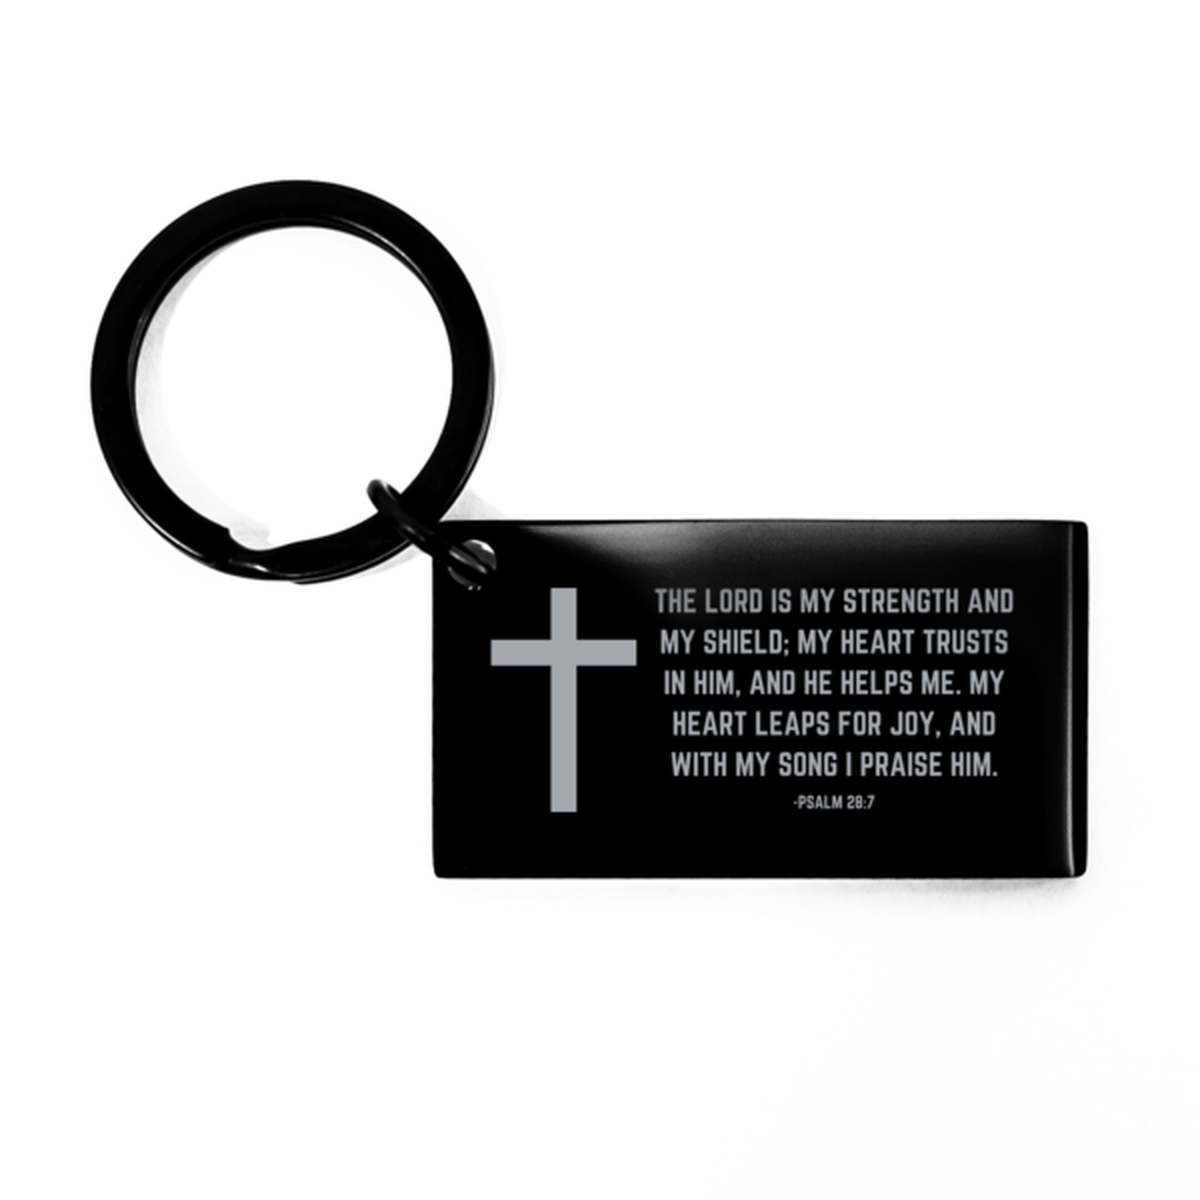 Baptism Gifts For Teenage Boys Girls, Christian Bible Verse Black Keychain, The Lord is my strength and my shield, Confirmation Gifts, Bible Verse Keyring for Son, Godson, Grandson, Nephew